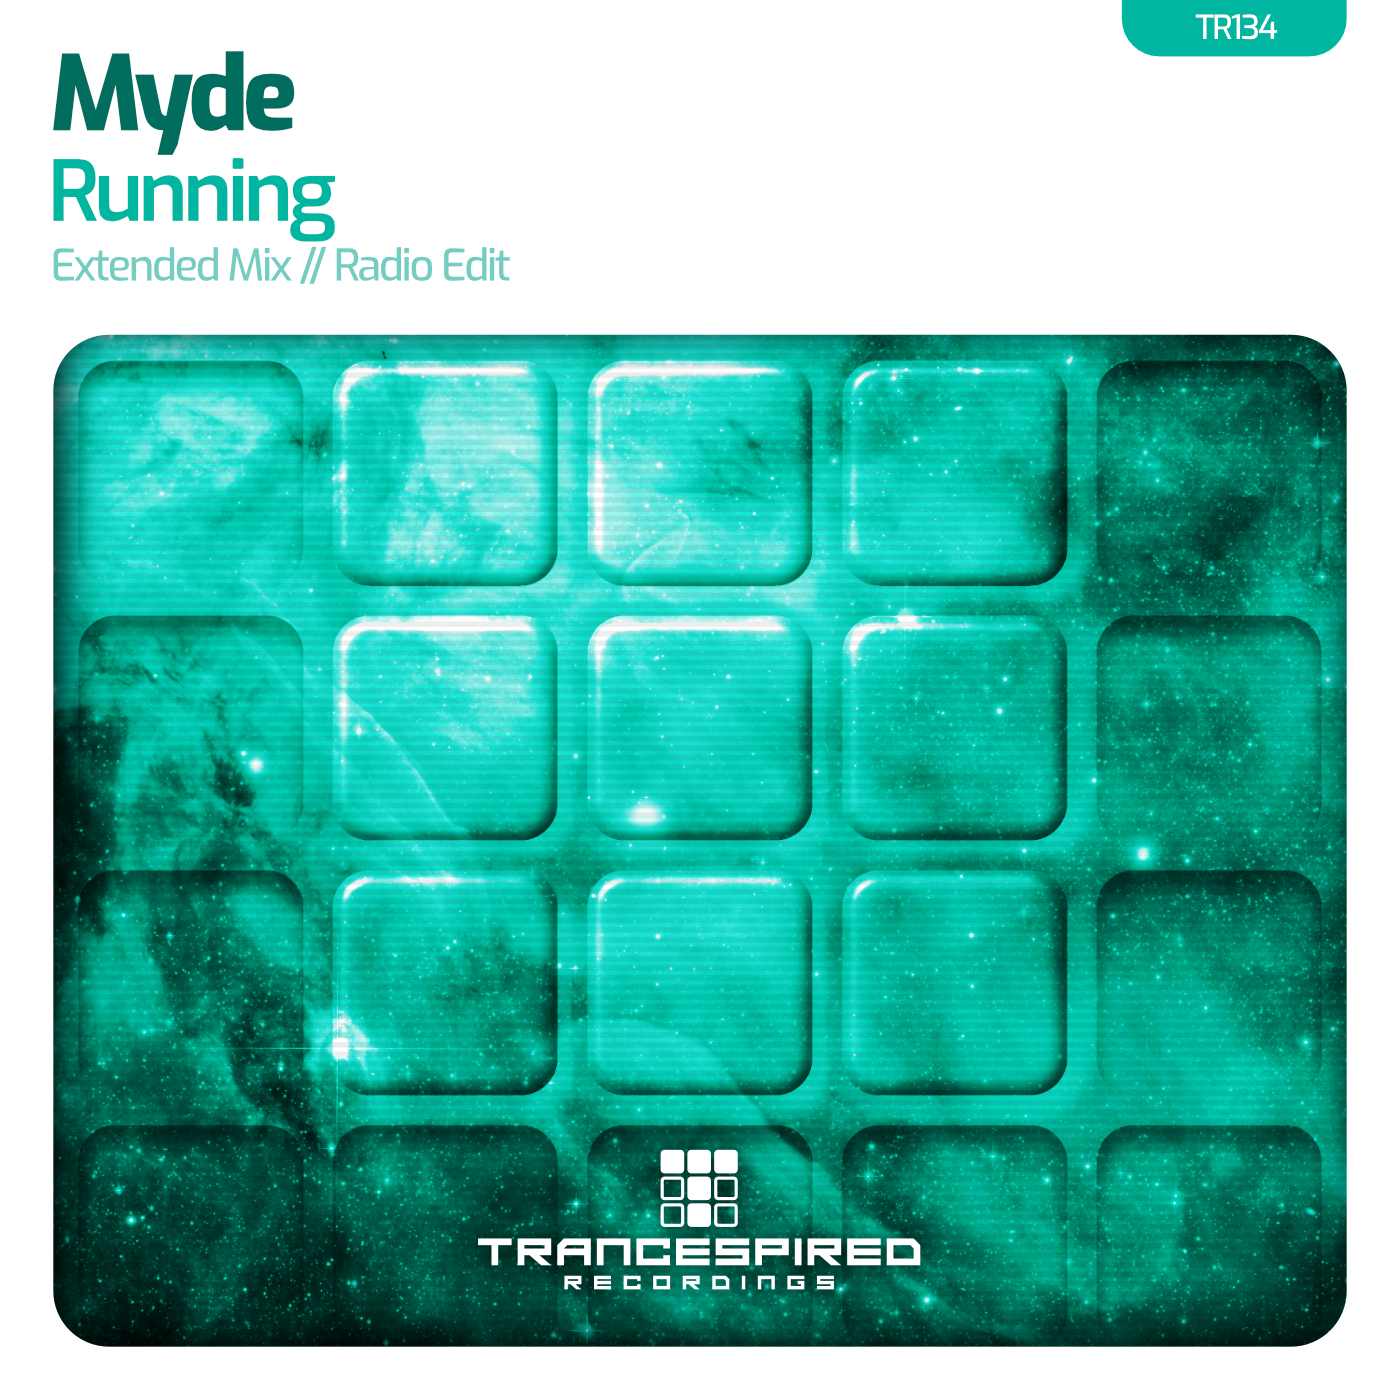 Myde presents Running on Trancespired Recordings